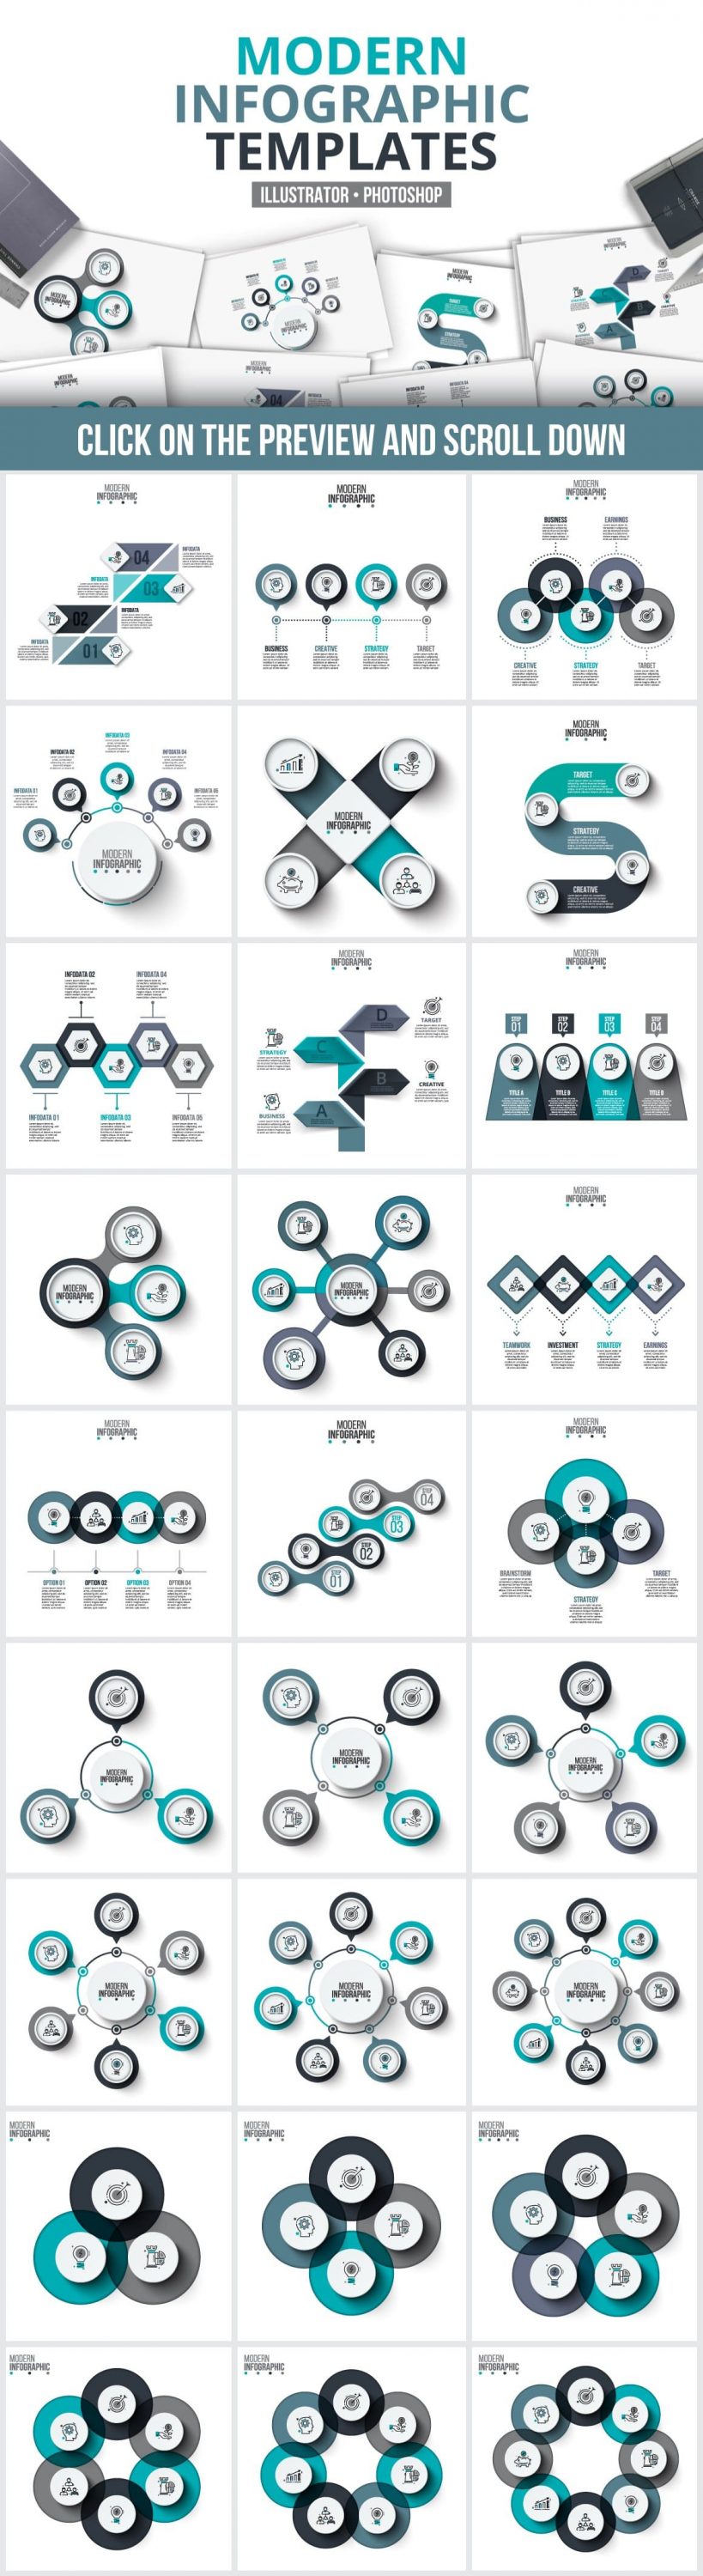 Modern Infographic Templates Massive Animated PowerPoint Bundle.